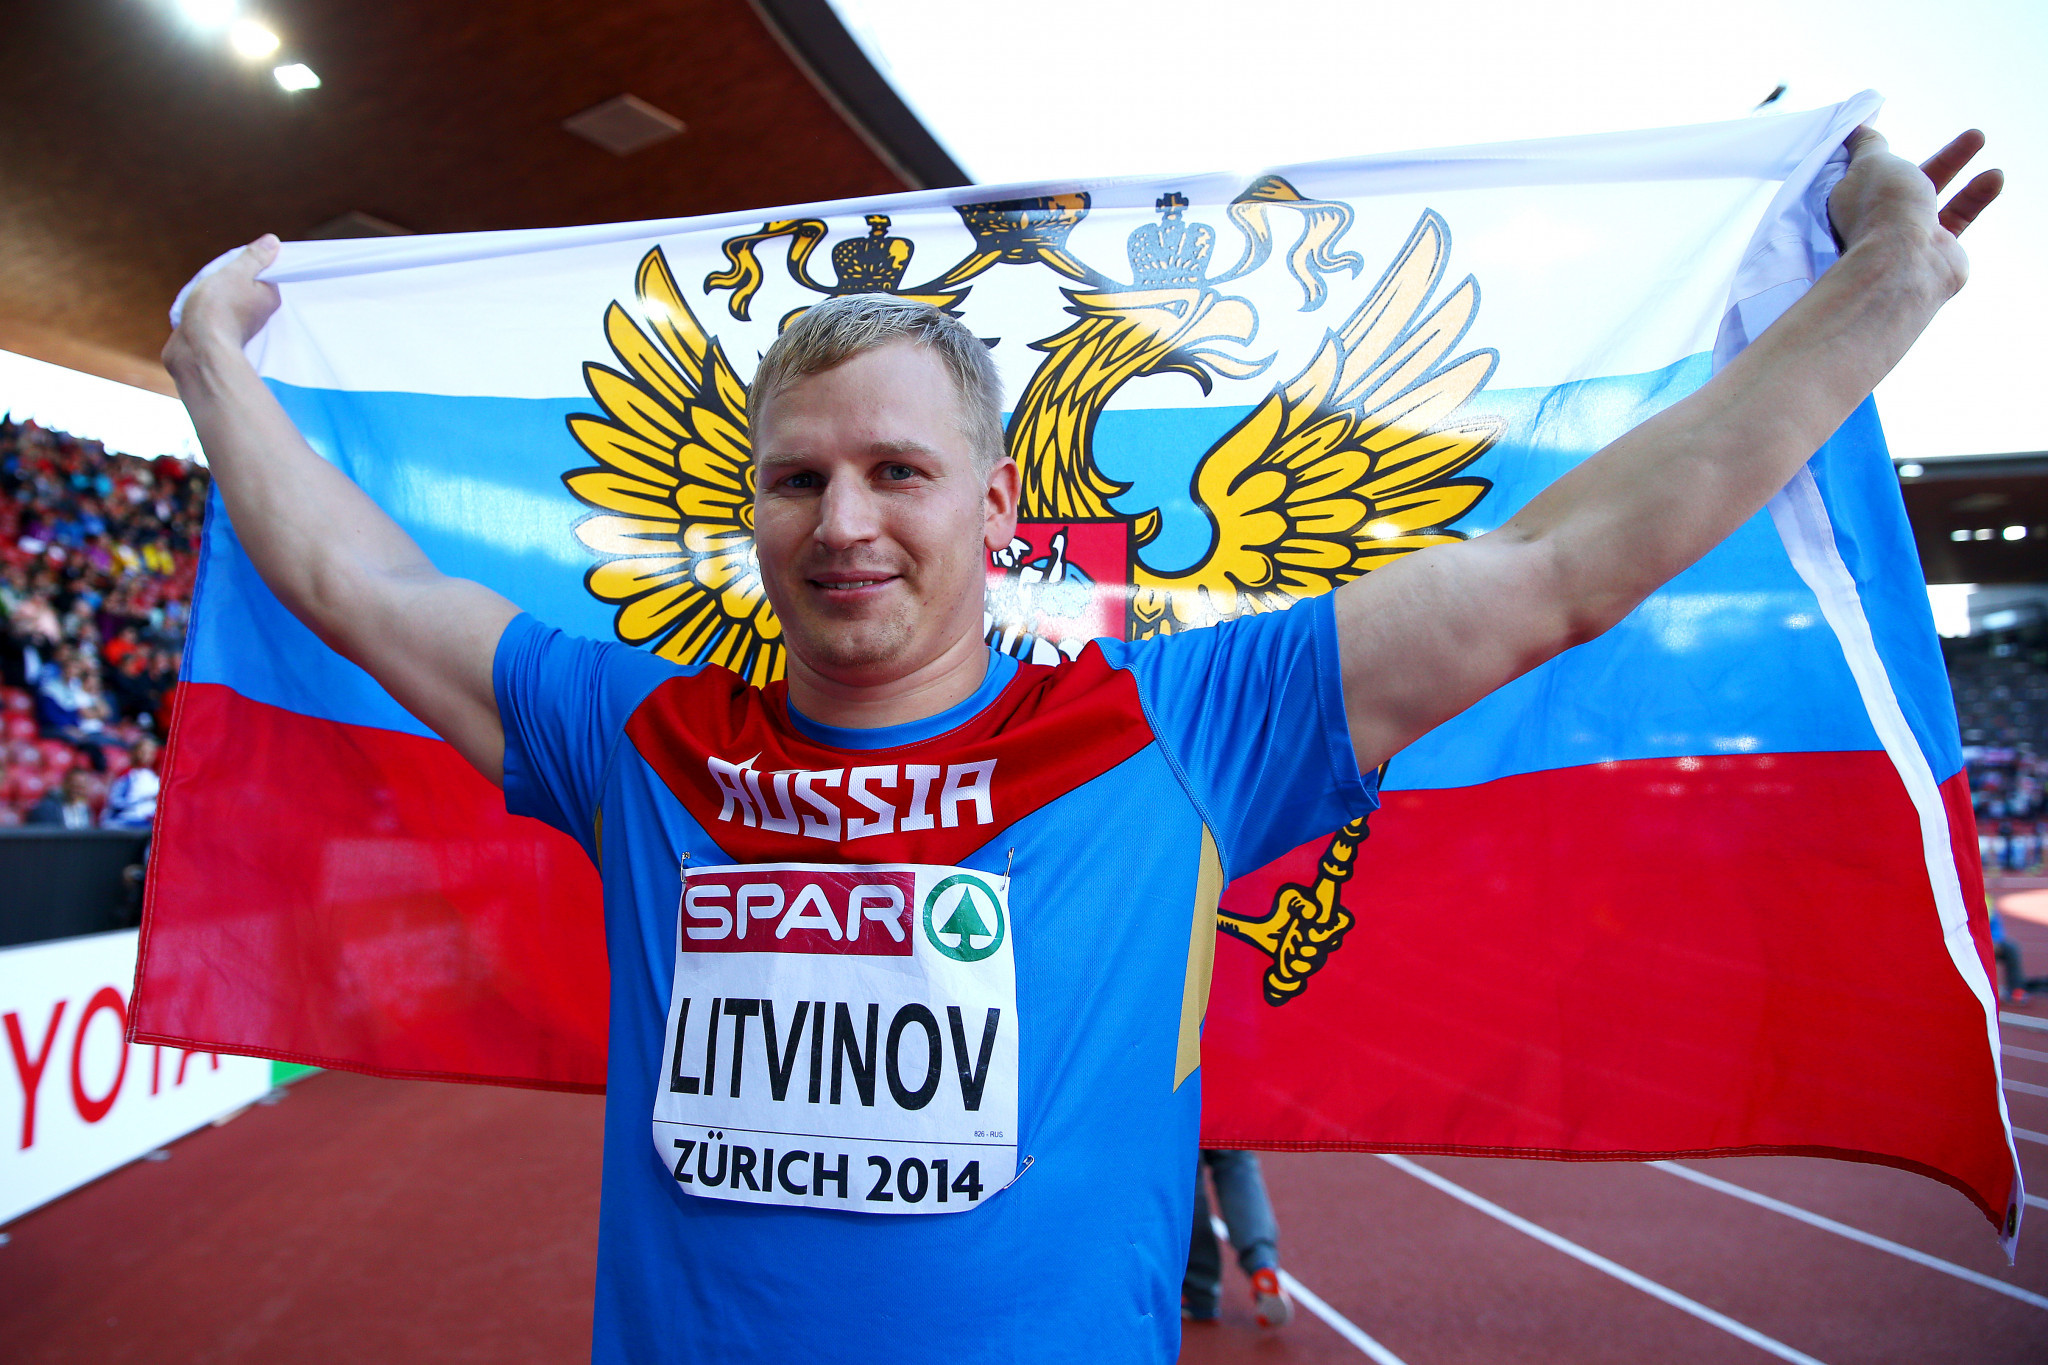 Sergey Litvinov coached his son to the bronze medal at the European Championships in 2014 ©Getty Images